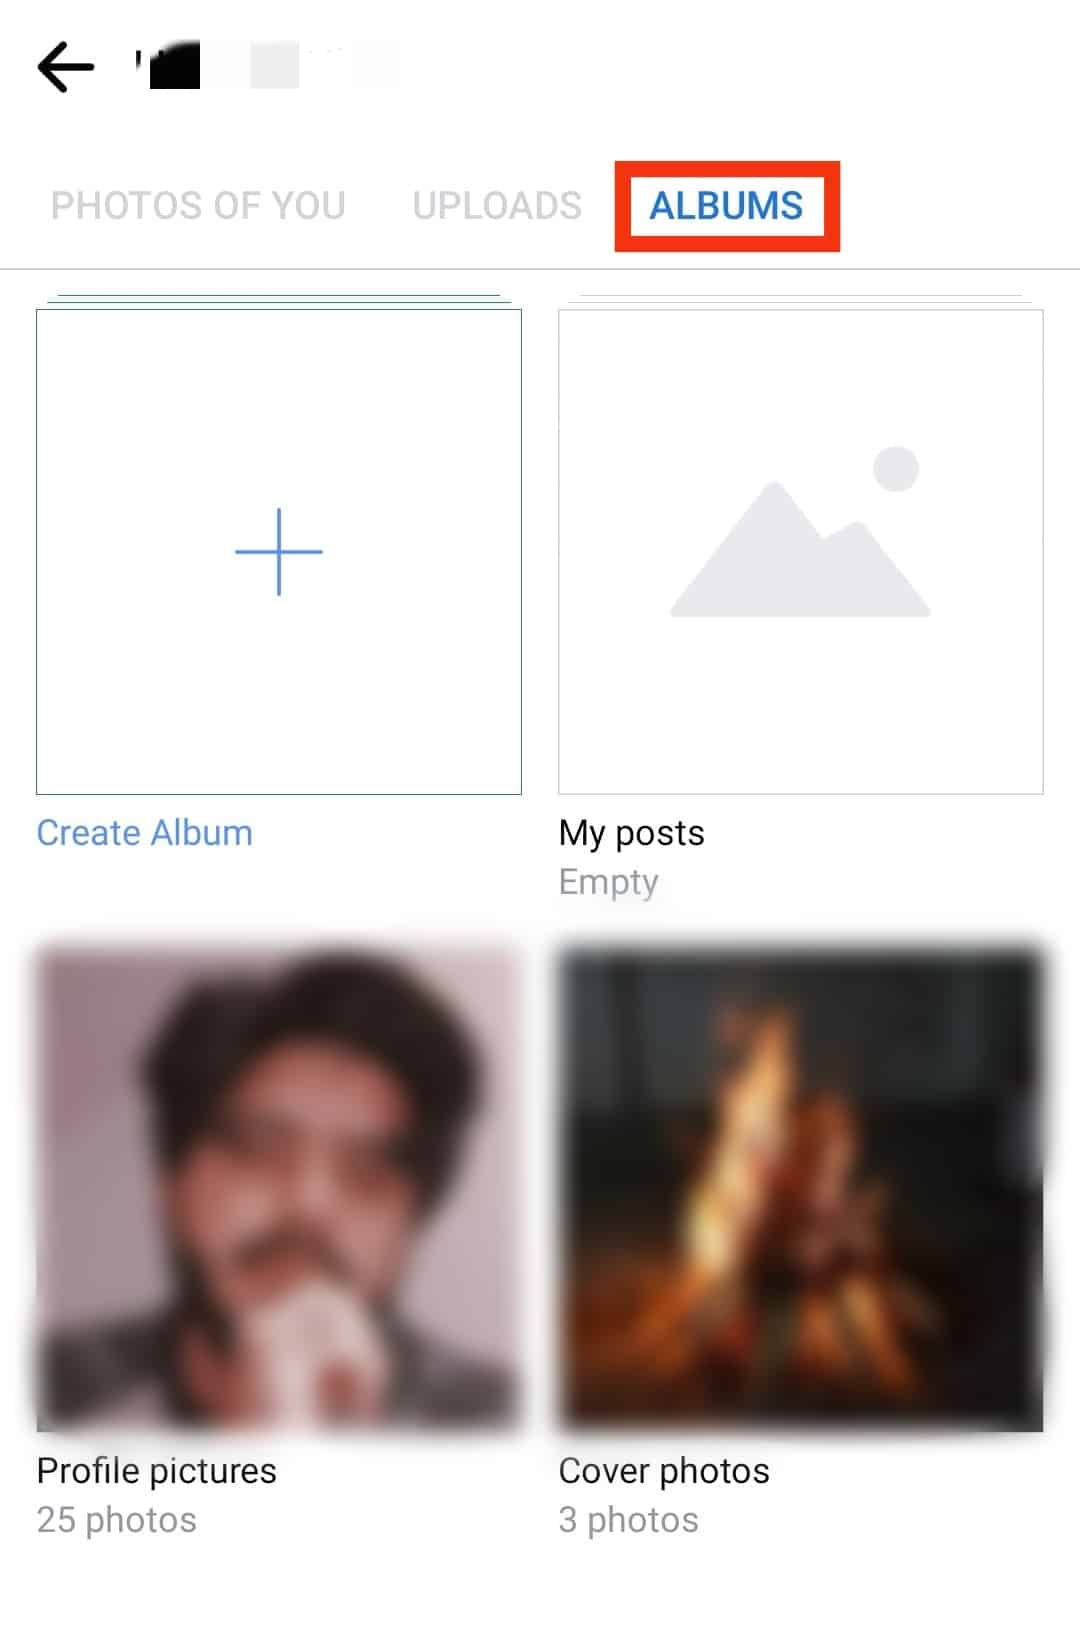 Click On The Albums Tab